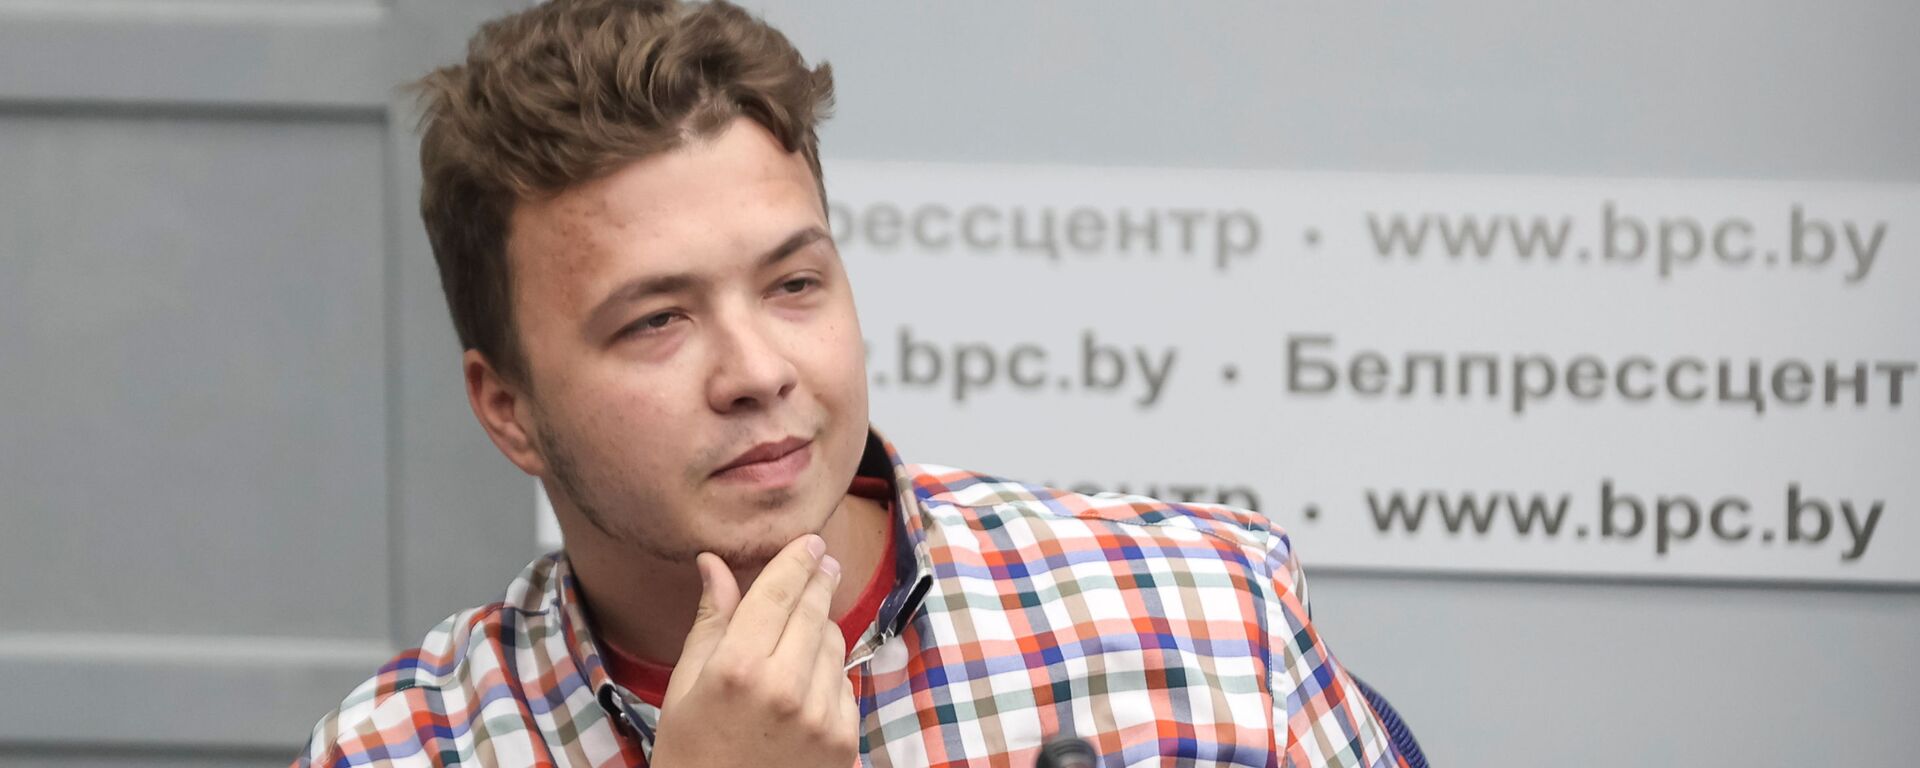 Jailed Belarus journalist Roman Protasevich takes part in a press conference about the forced landing of the Ryanair passenger plane on which he was travelling, in Minsk, Belarus June 14, 2021 - Sputnik International, 1920, 25.06.2021